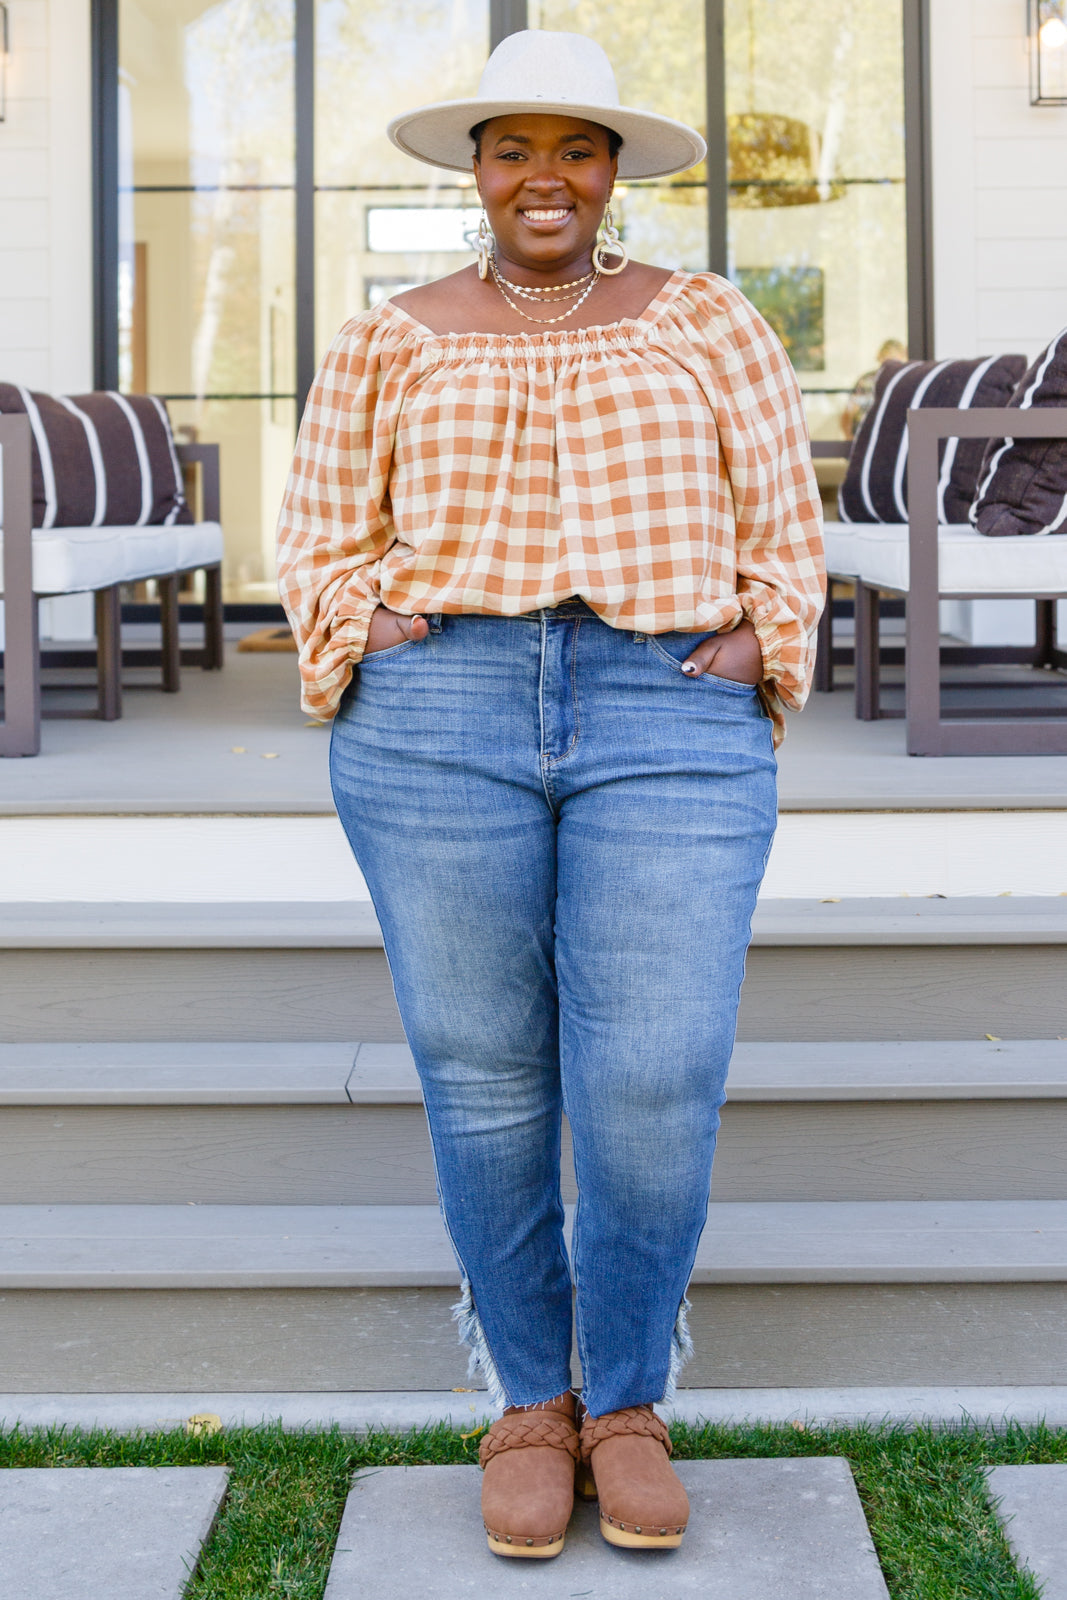 Womens - One Fine Afternoon Gingham Plaid Top In Caramel